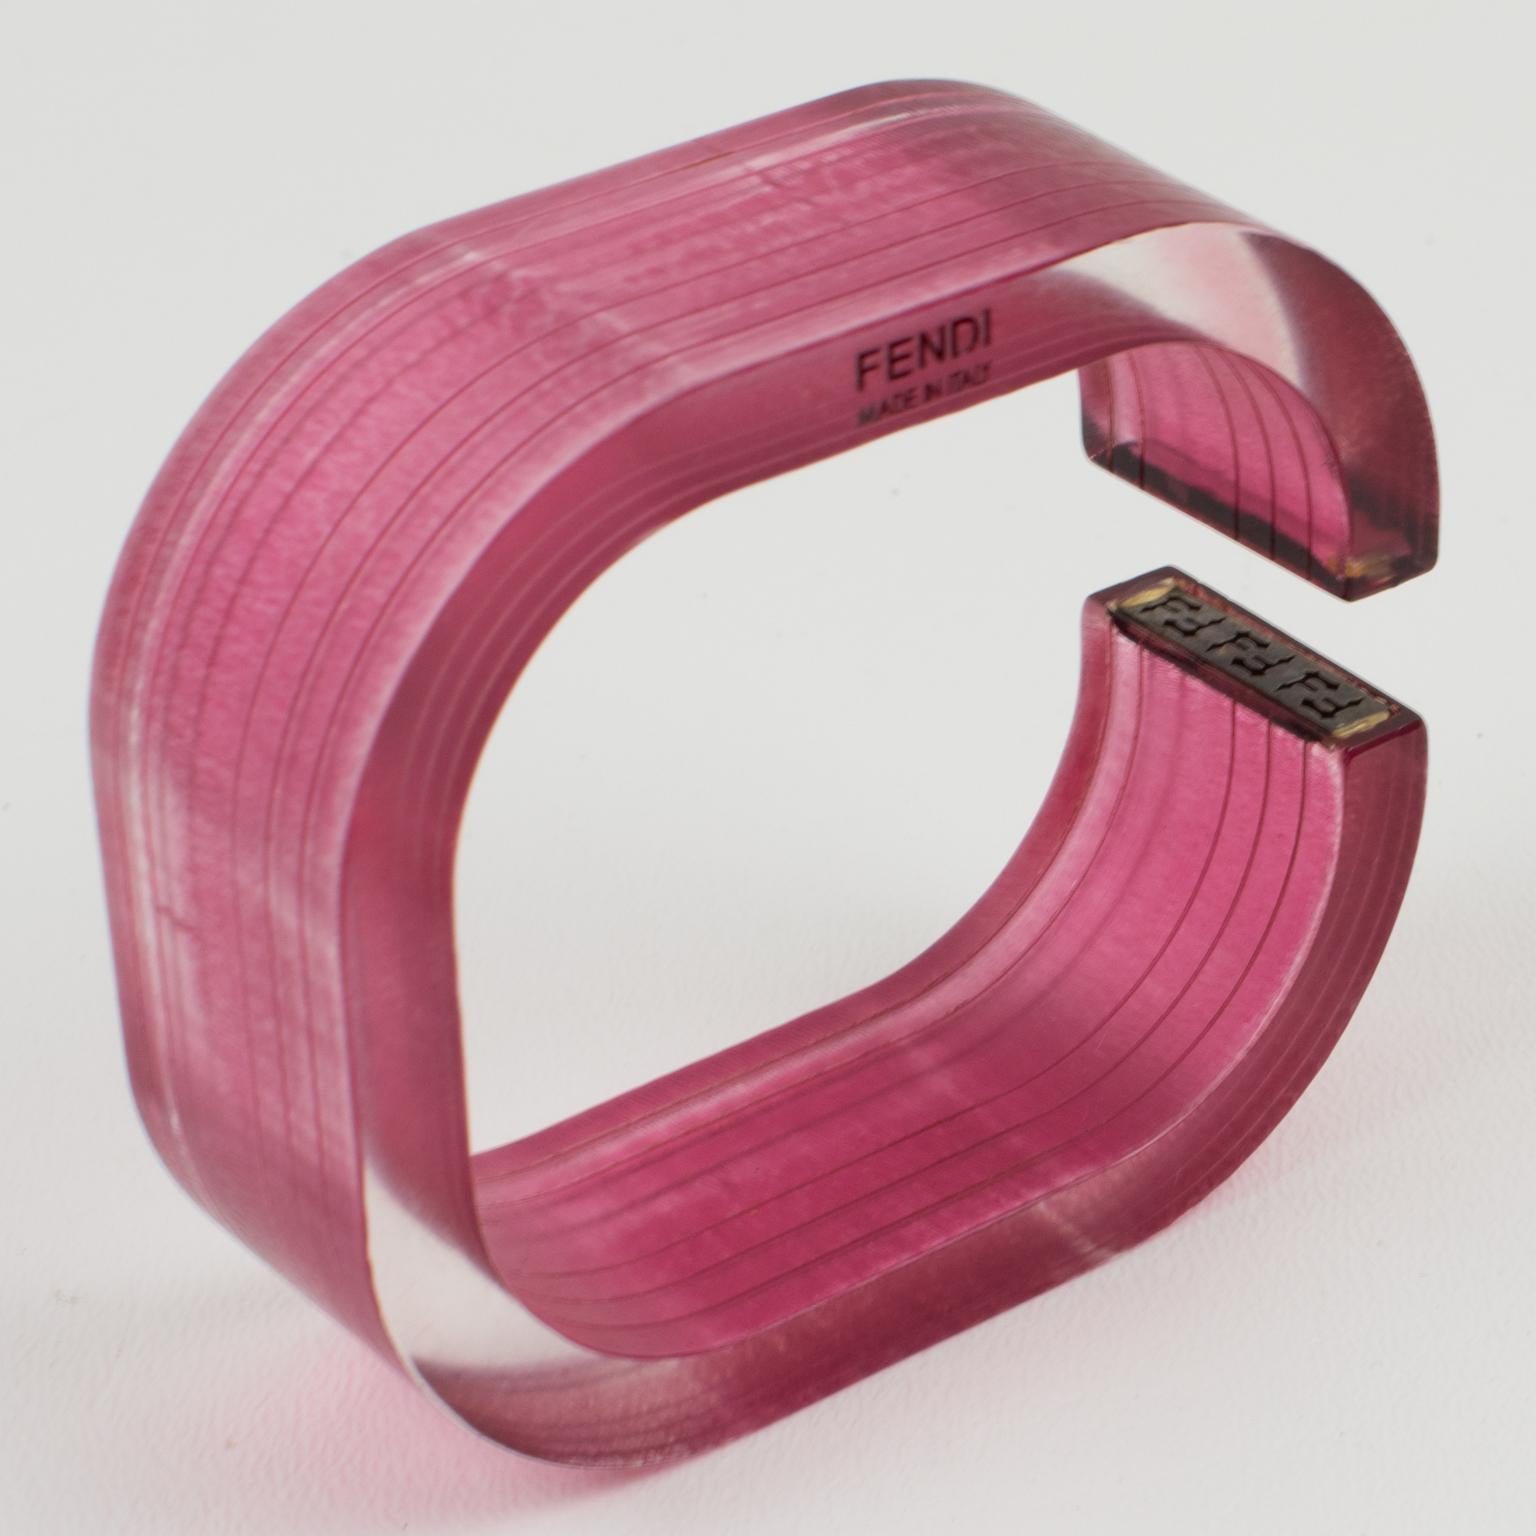 Lovely Fendi, Italy bracelet bangle. Geometric resin or acrylic bracelet, featuring a square cuff in translucent pink-red raspberry color, ornate with sterling silver 